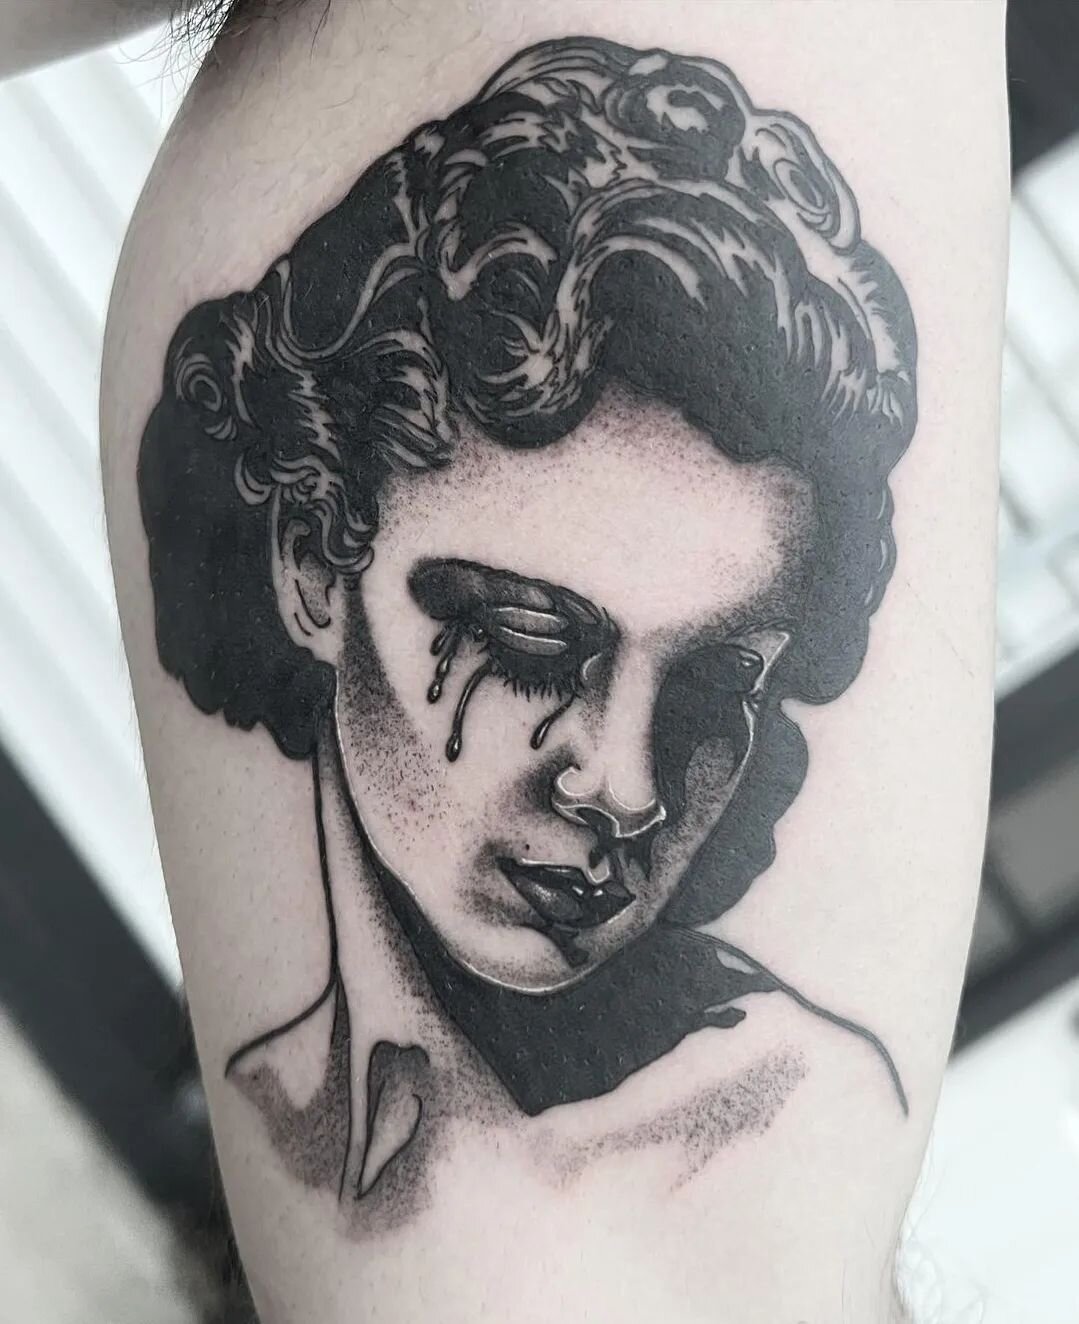 Devastatingly gorgeous blackwork from Caroline. This is one of her original flash pieces. To see more available flash designs, check out her Instagram @carolinemaetattoos 
.
.
#blackworktattoo #blackworkers #linework #lineworktattoo #dotwork #stippli